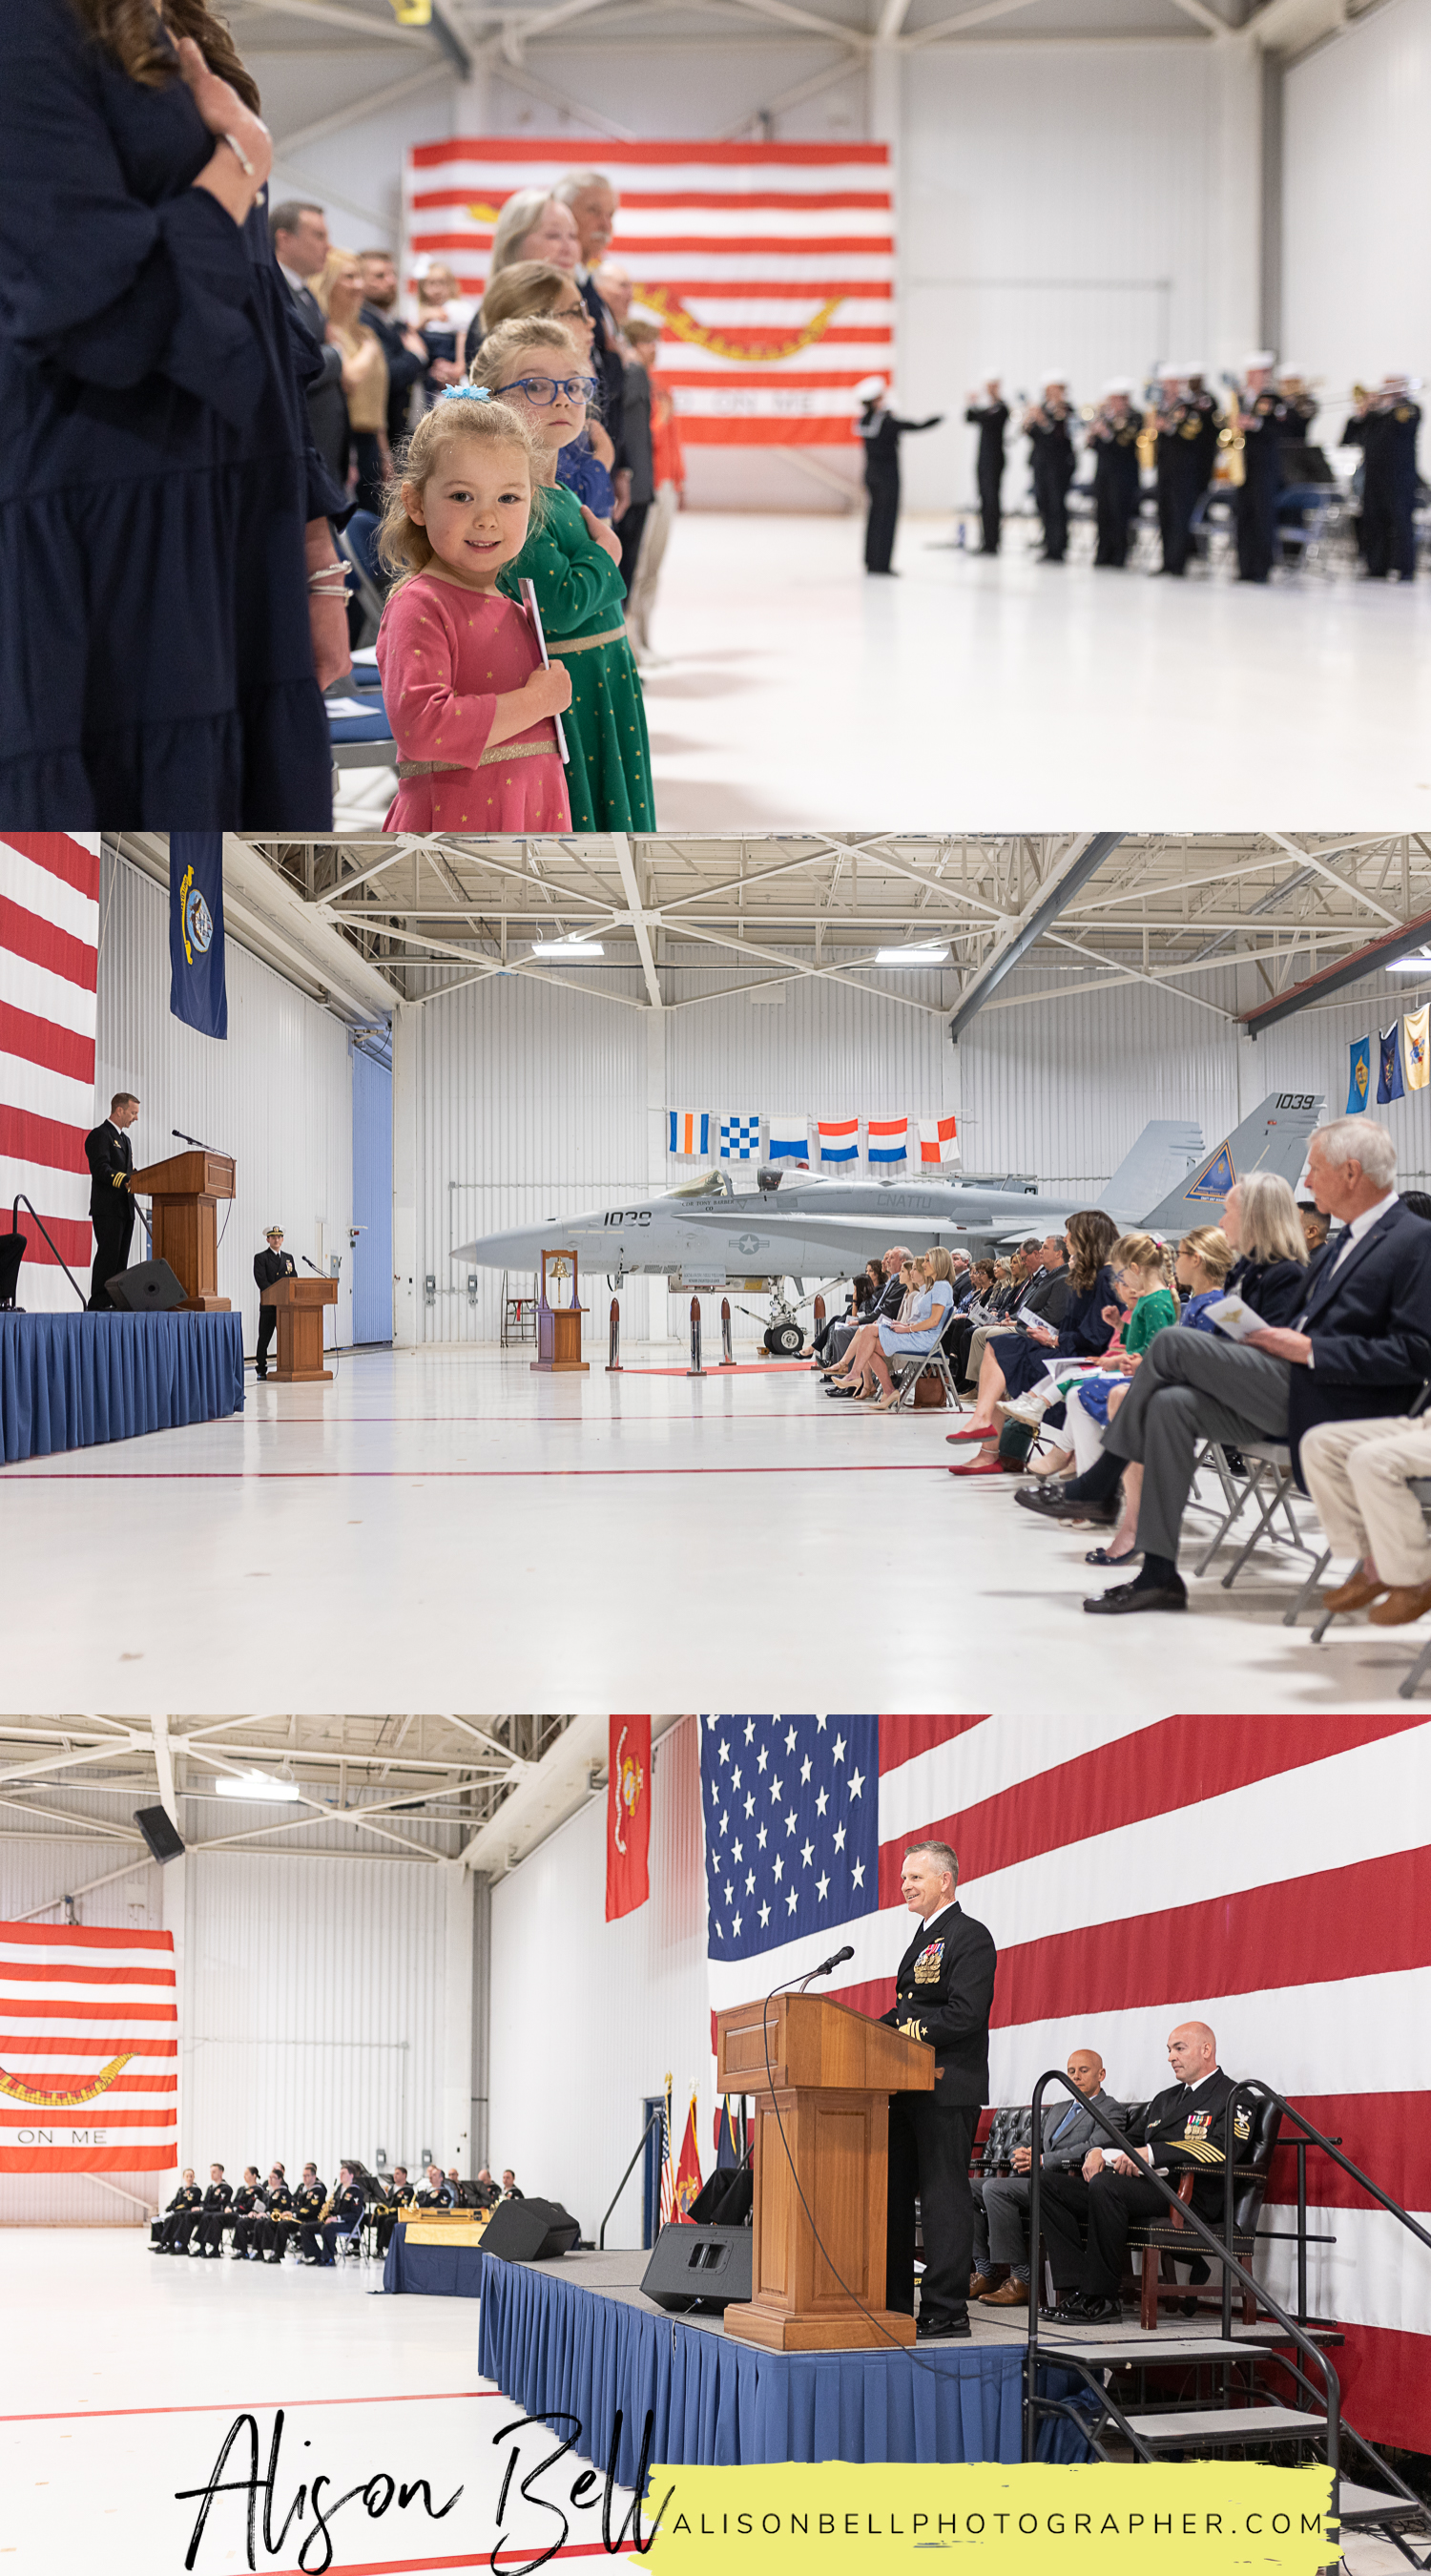 Navy change of command ceremony at oceana naval air station inside hangar by alison bell photographer virginia beach